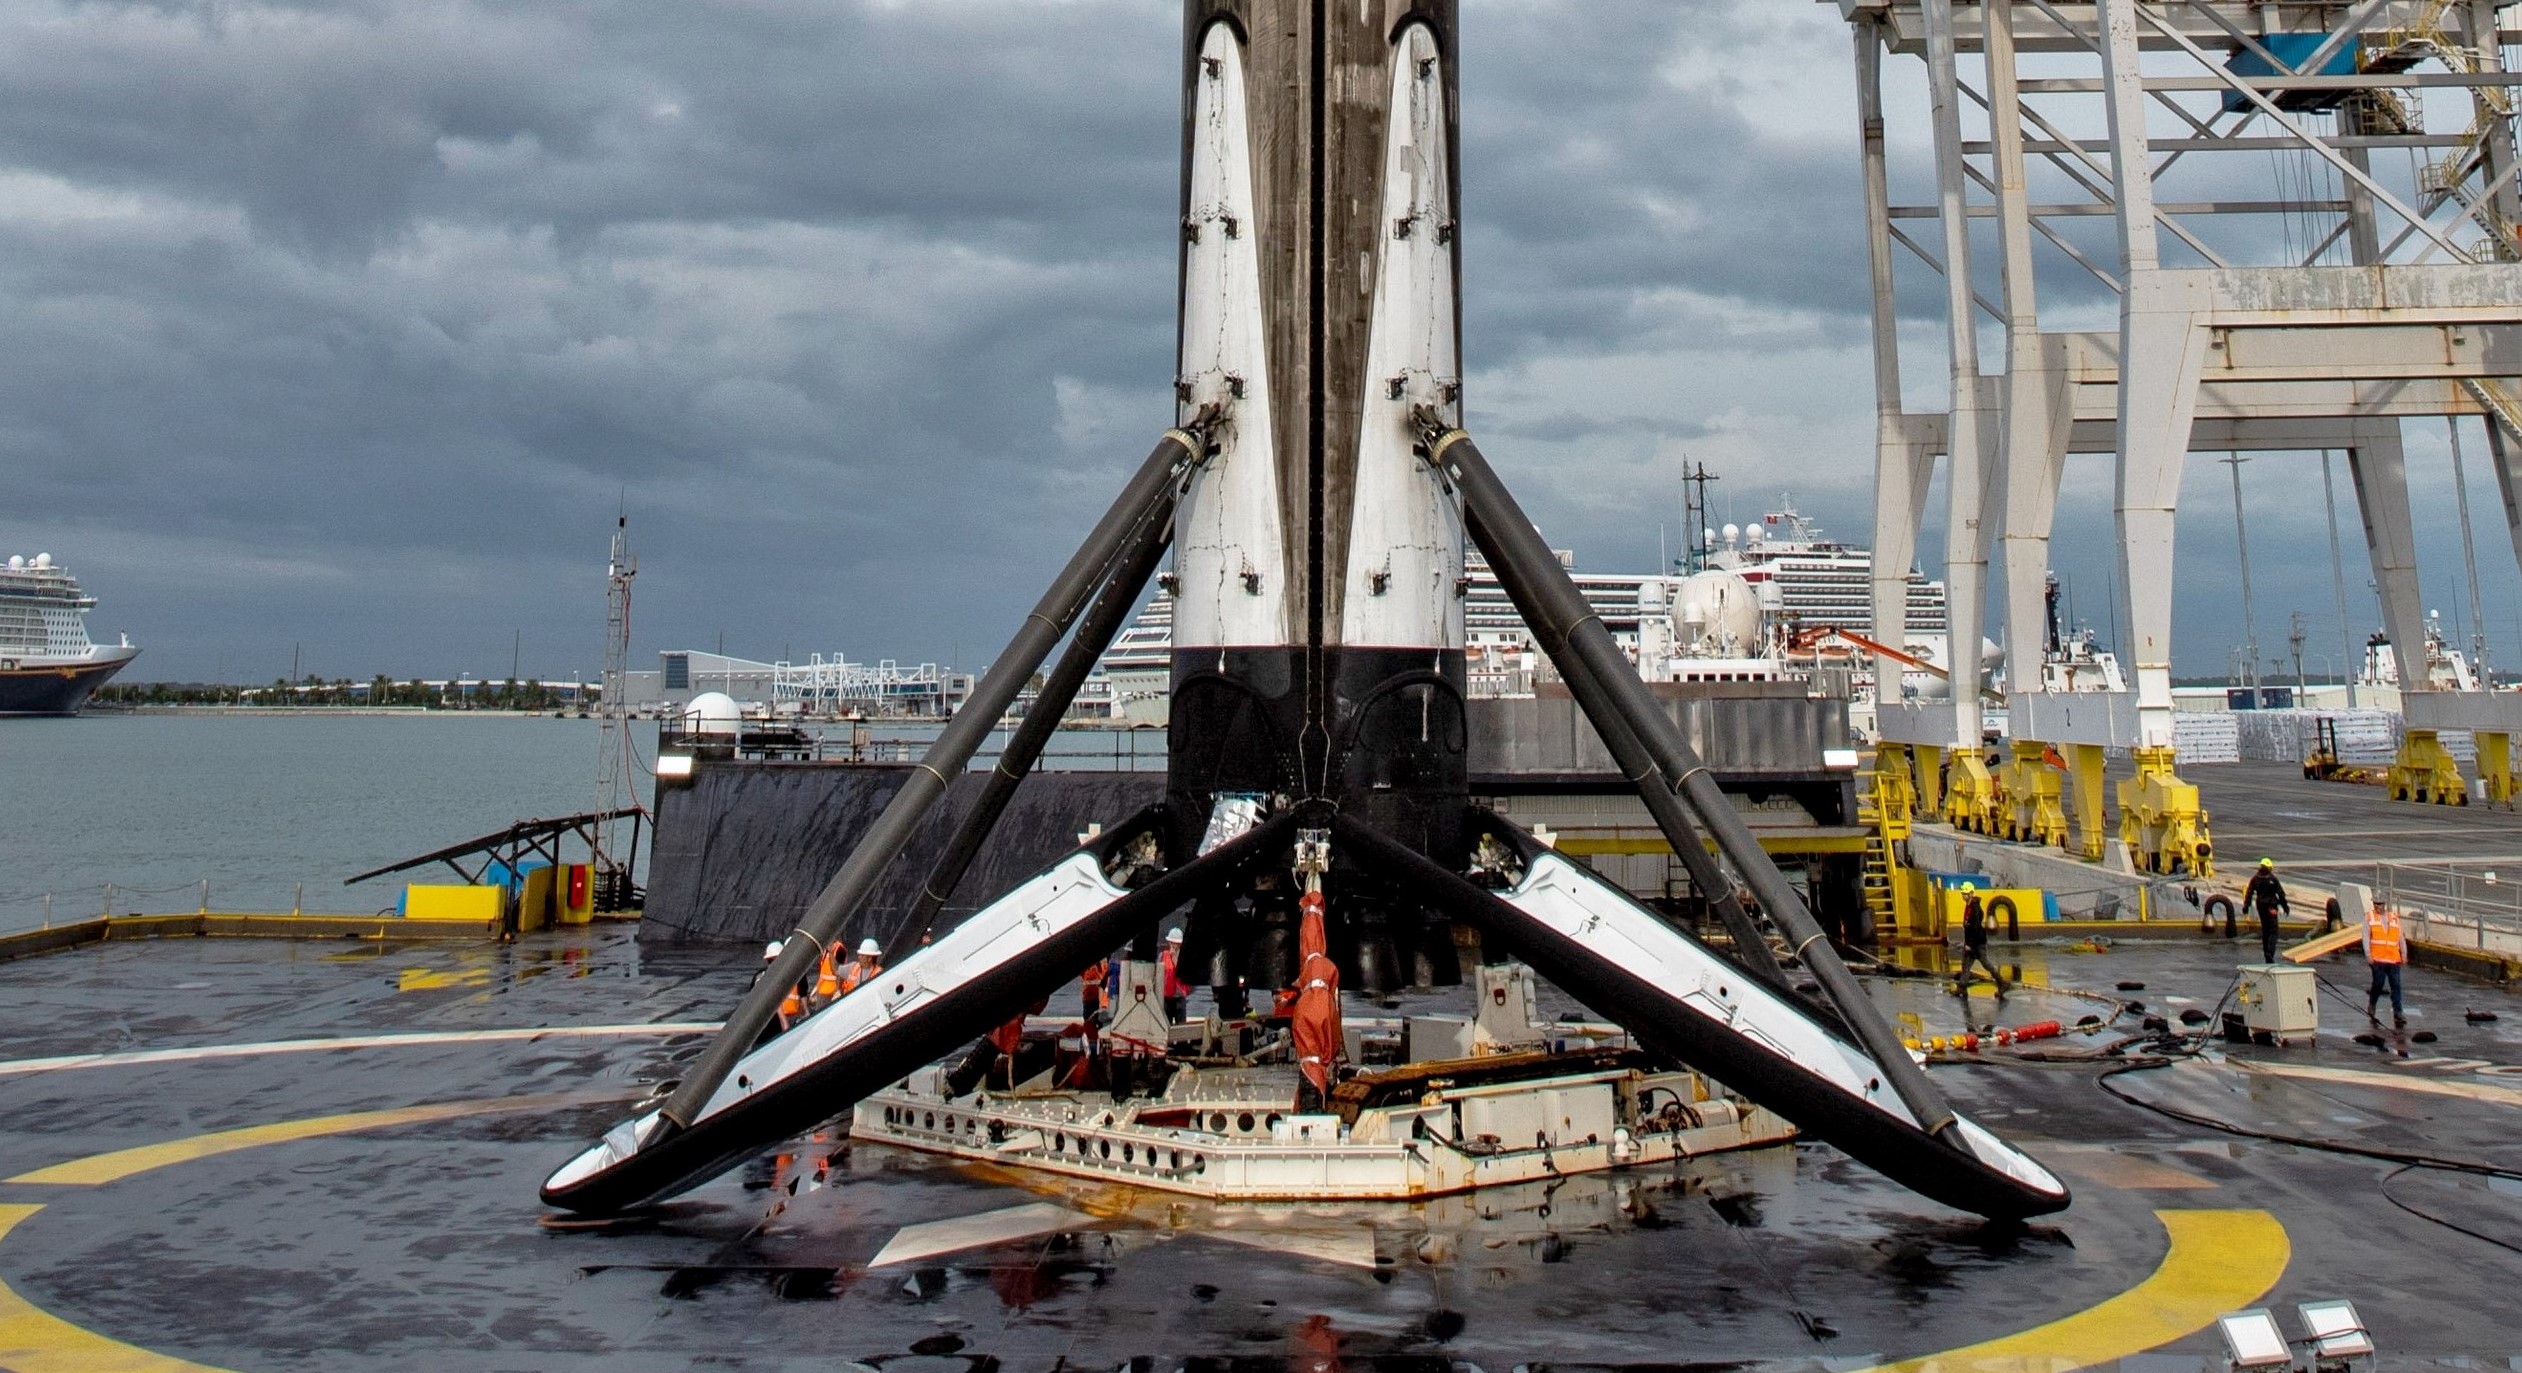 Starlink-1 Falcon 9 B1048 recovery Nov 2019 (SpaceX) 2 crop